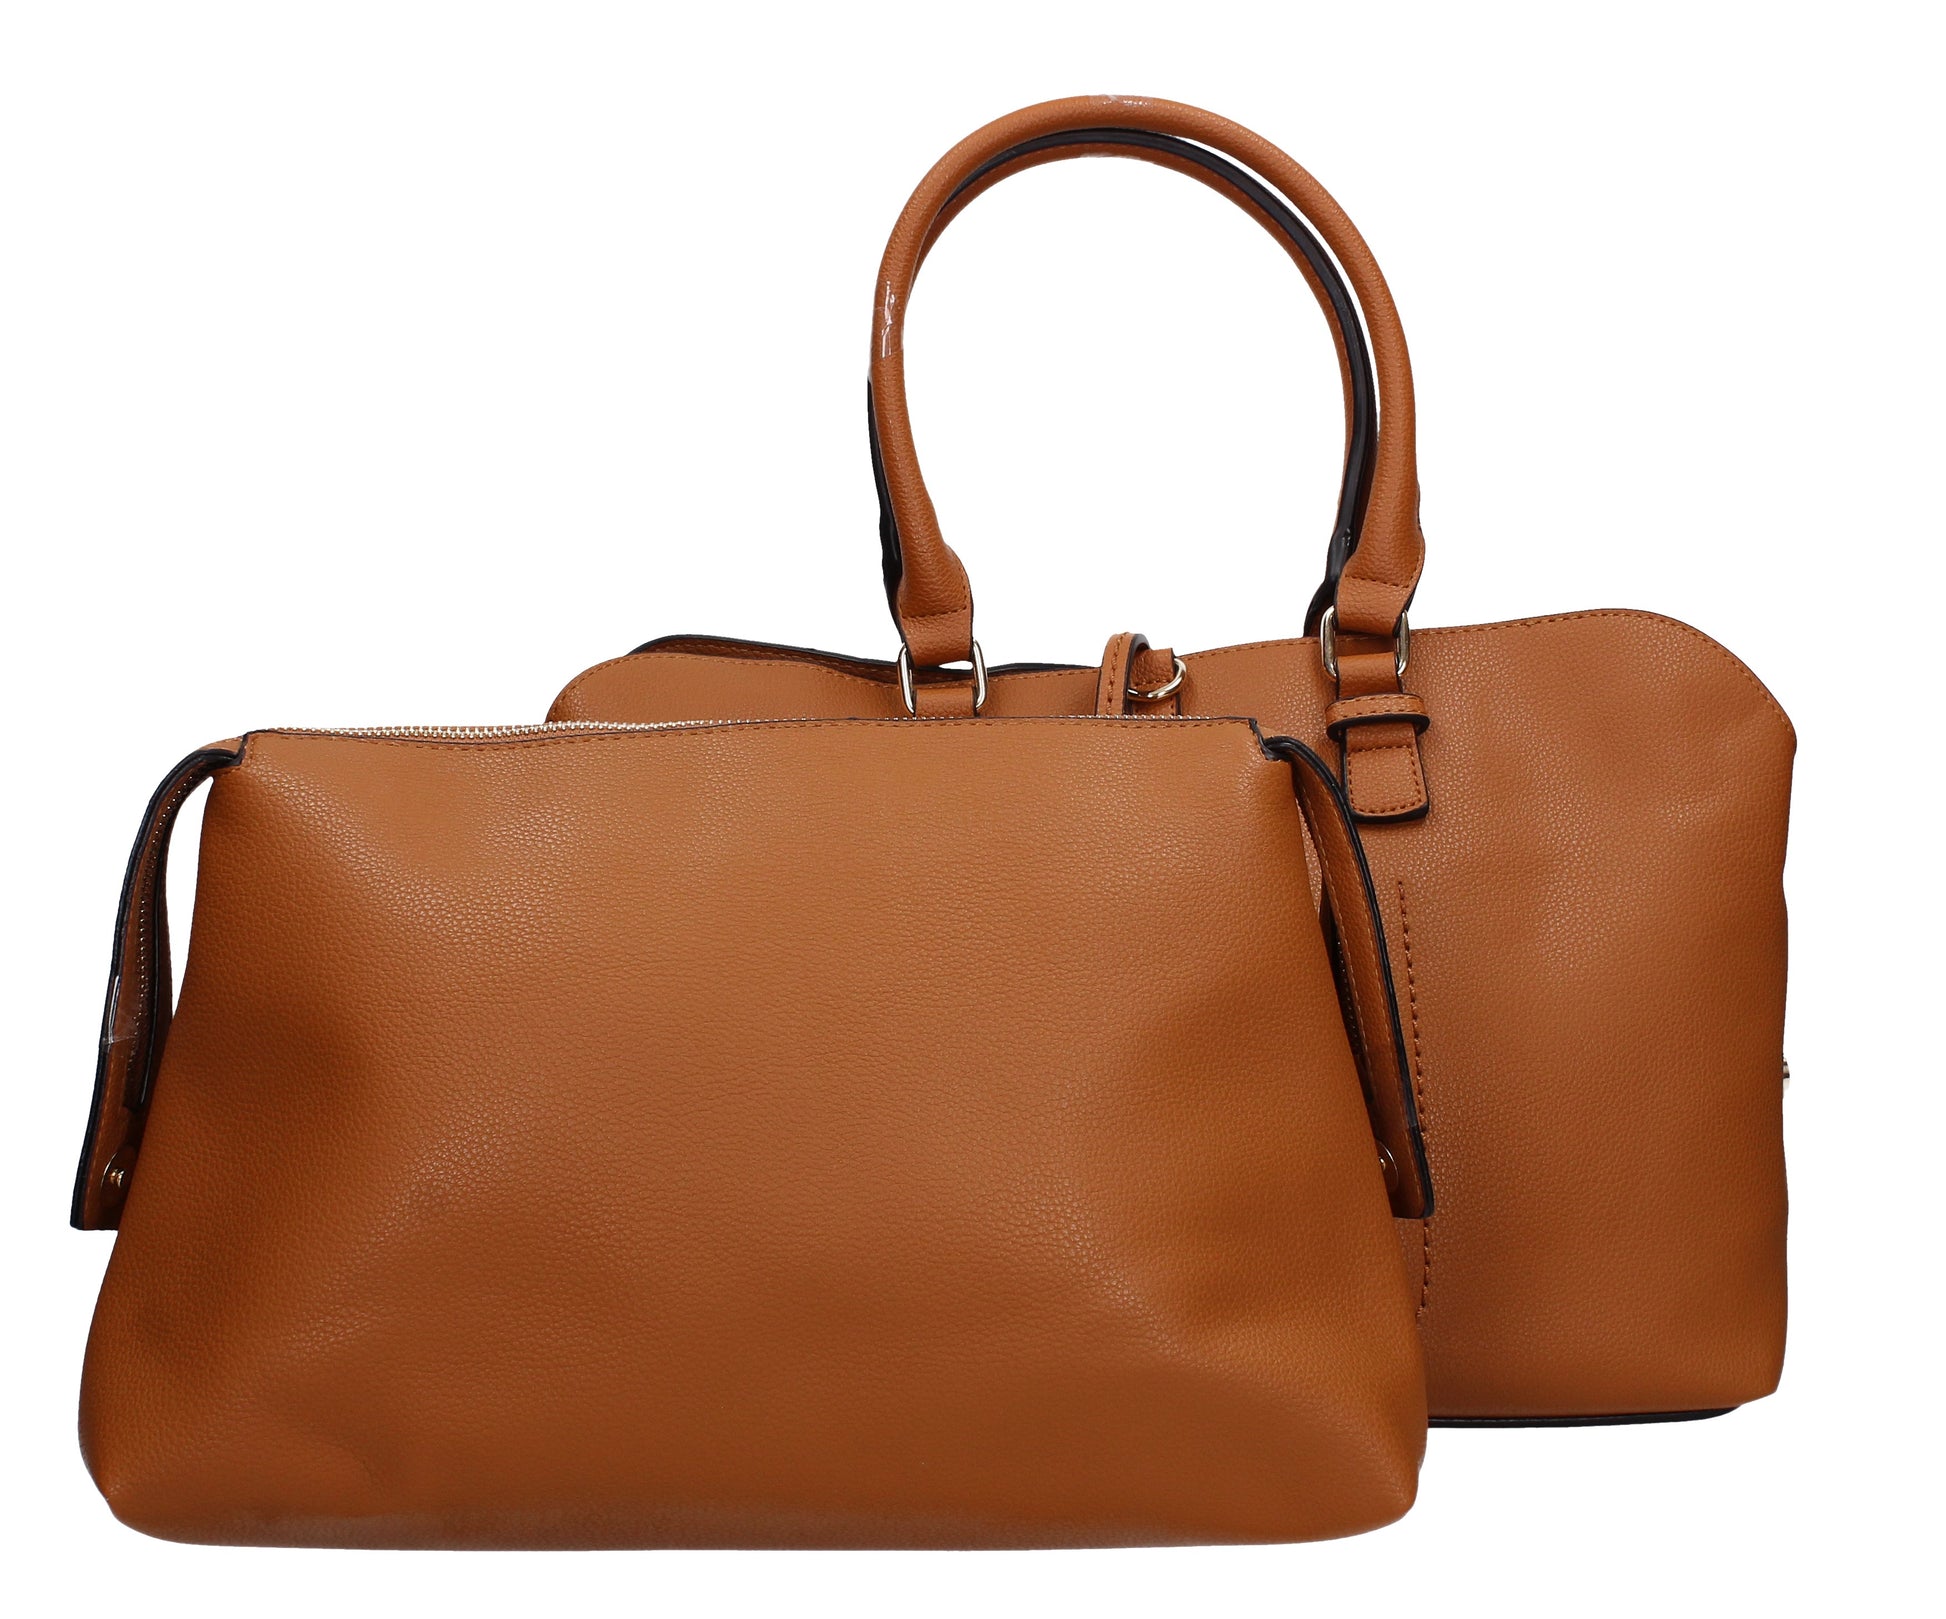 Buy your Leia Handbag Tan Brown Today! Buy with confidence from Swankyswans